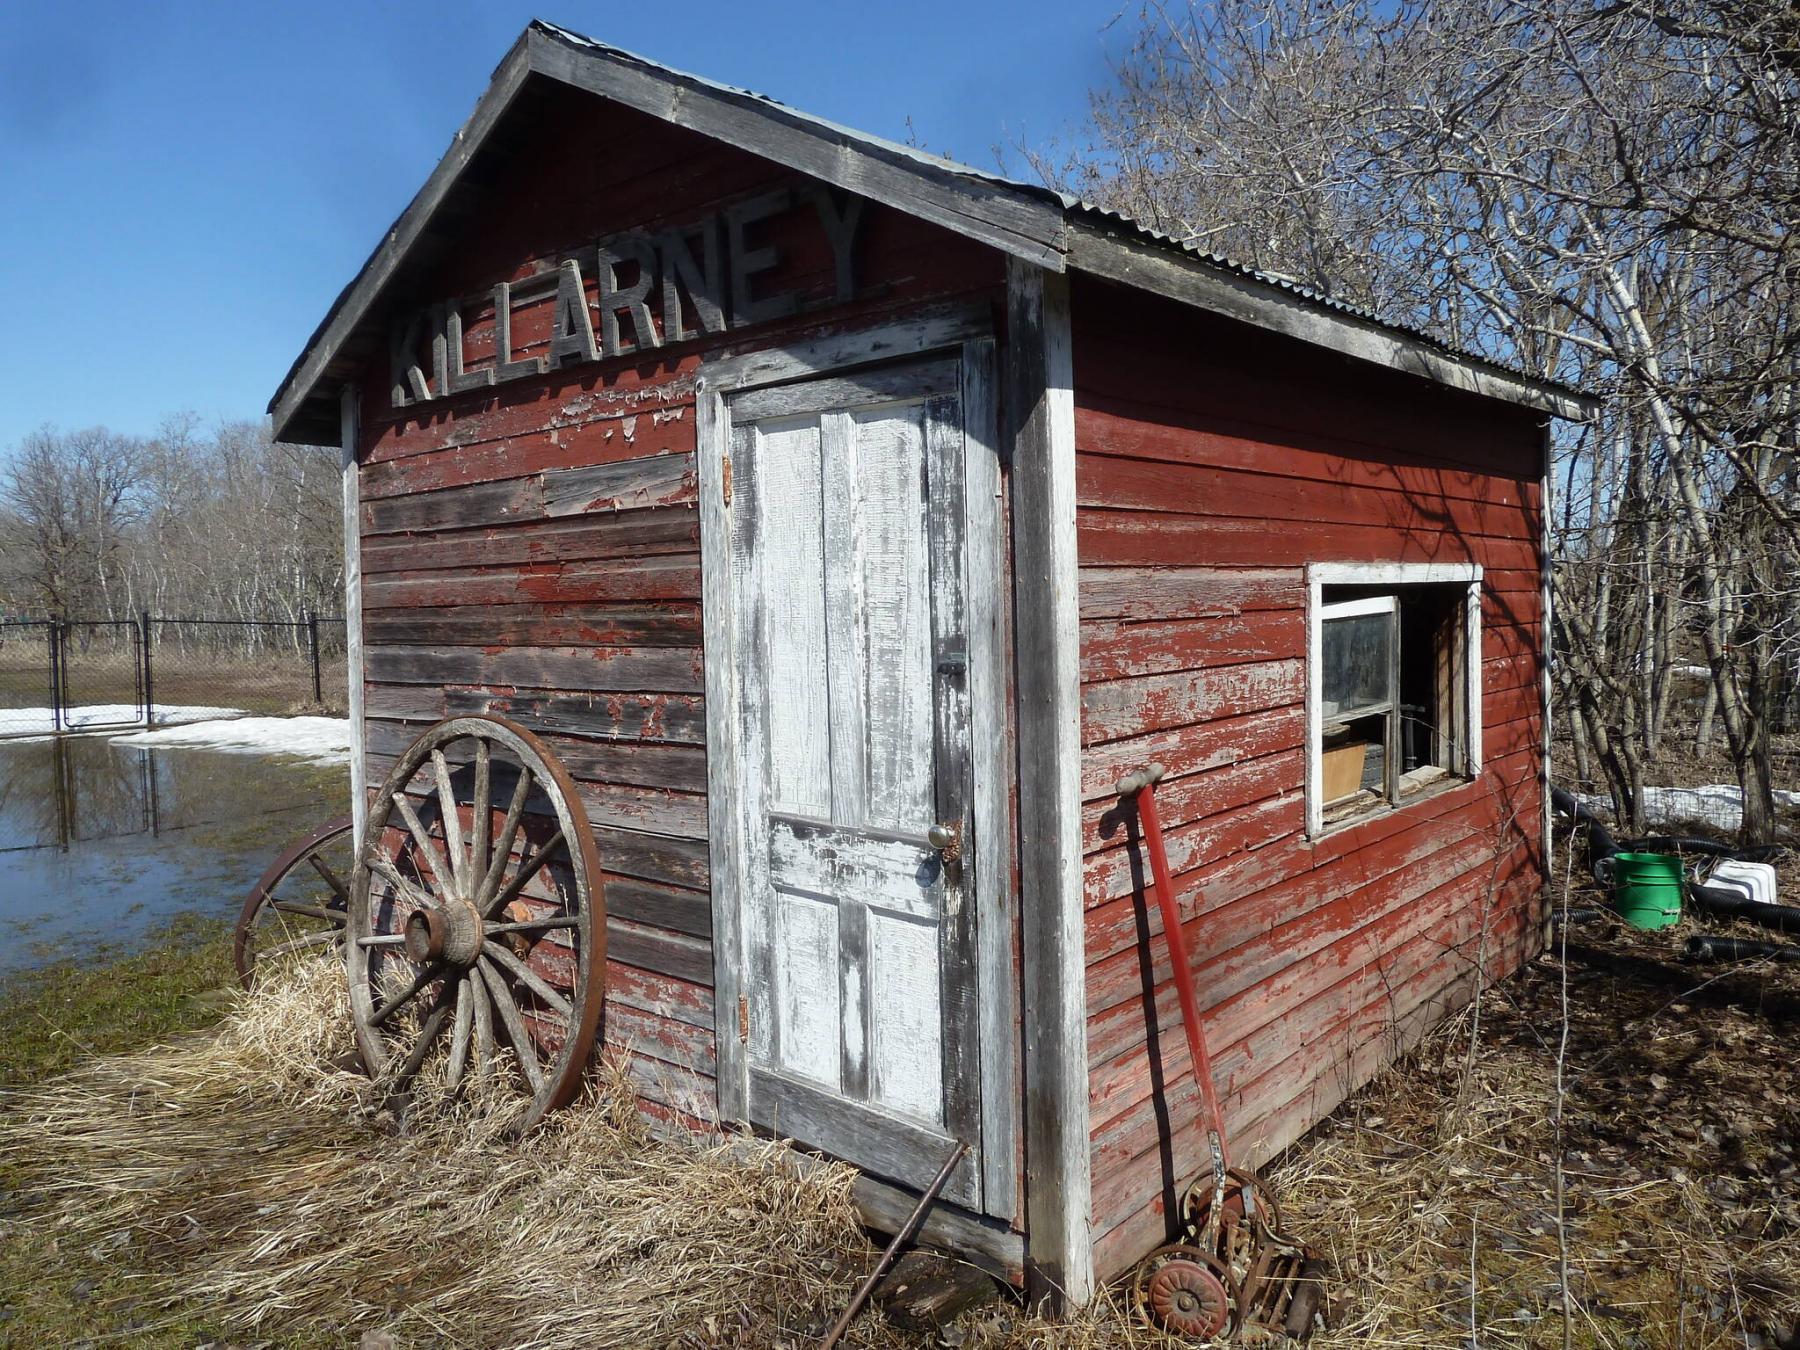 <p>Photos by Laurie Mustard / Winnipeg Free Press</p><p>With a bit of elbow grease this shed will become a comfy tiny house on the prairie.</p>